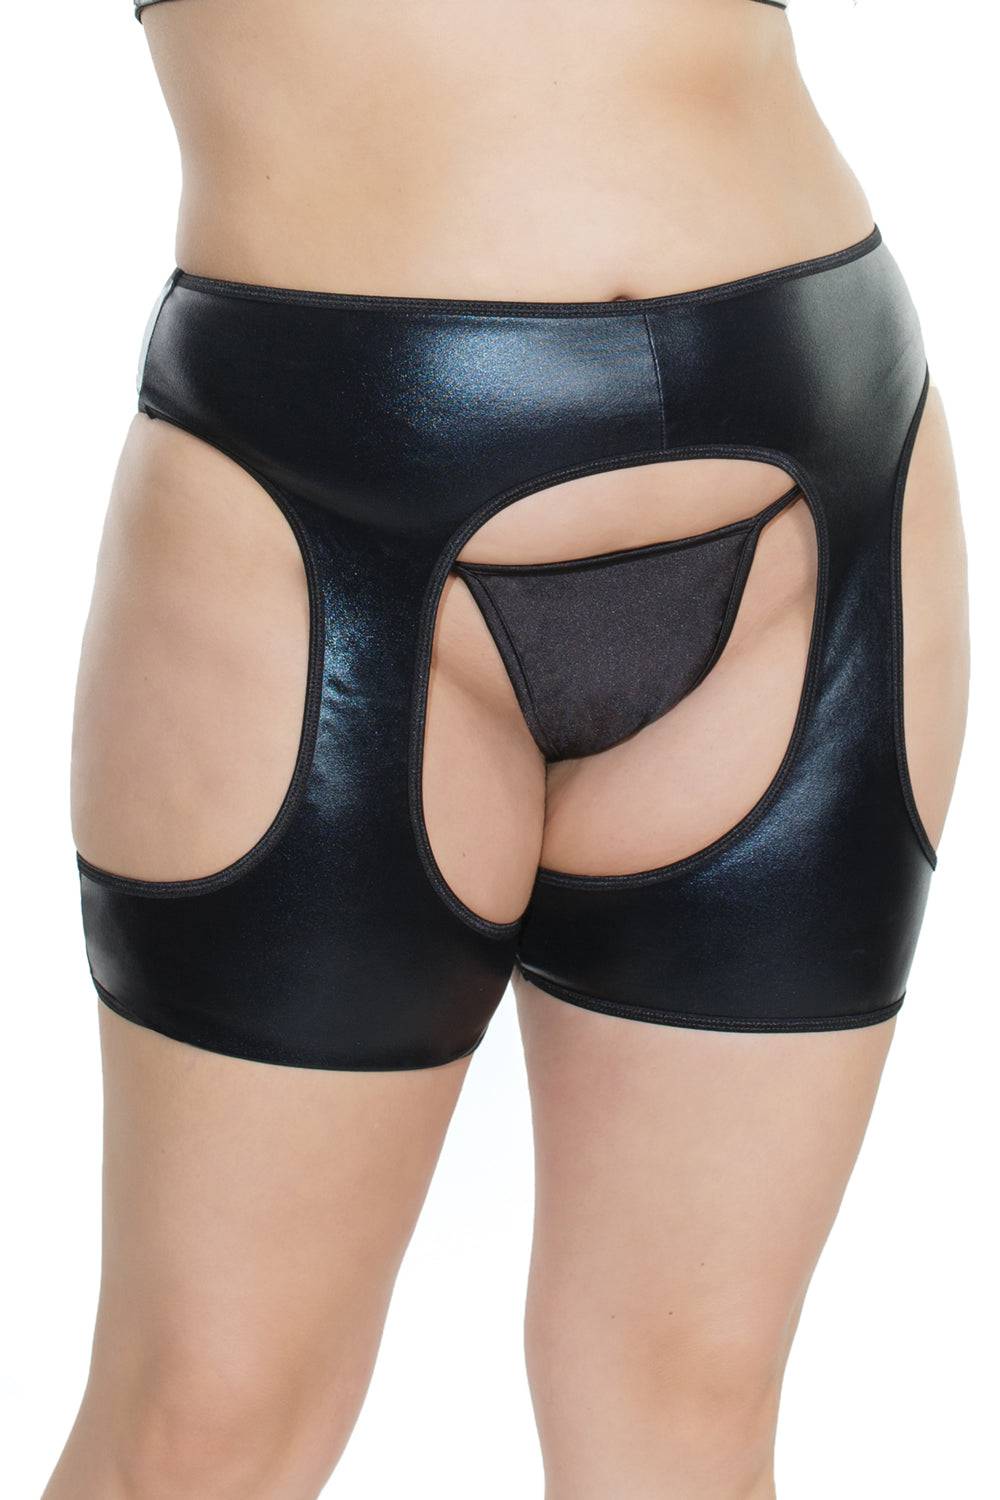 Coquette - 7243X - Wetlook Booty Chaps - Black - OSXL - Stag Shop